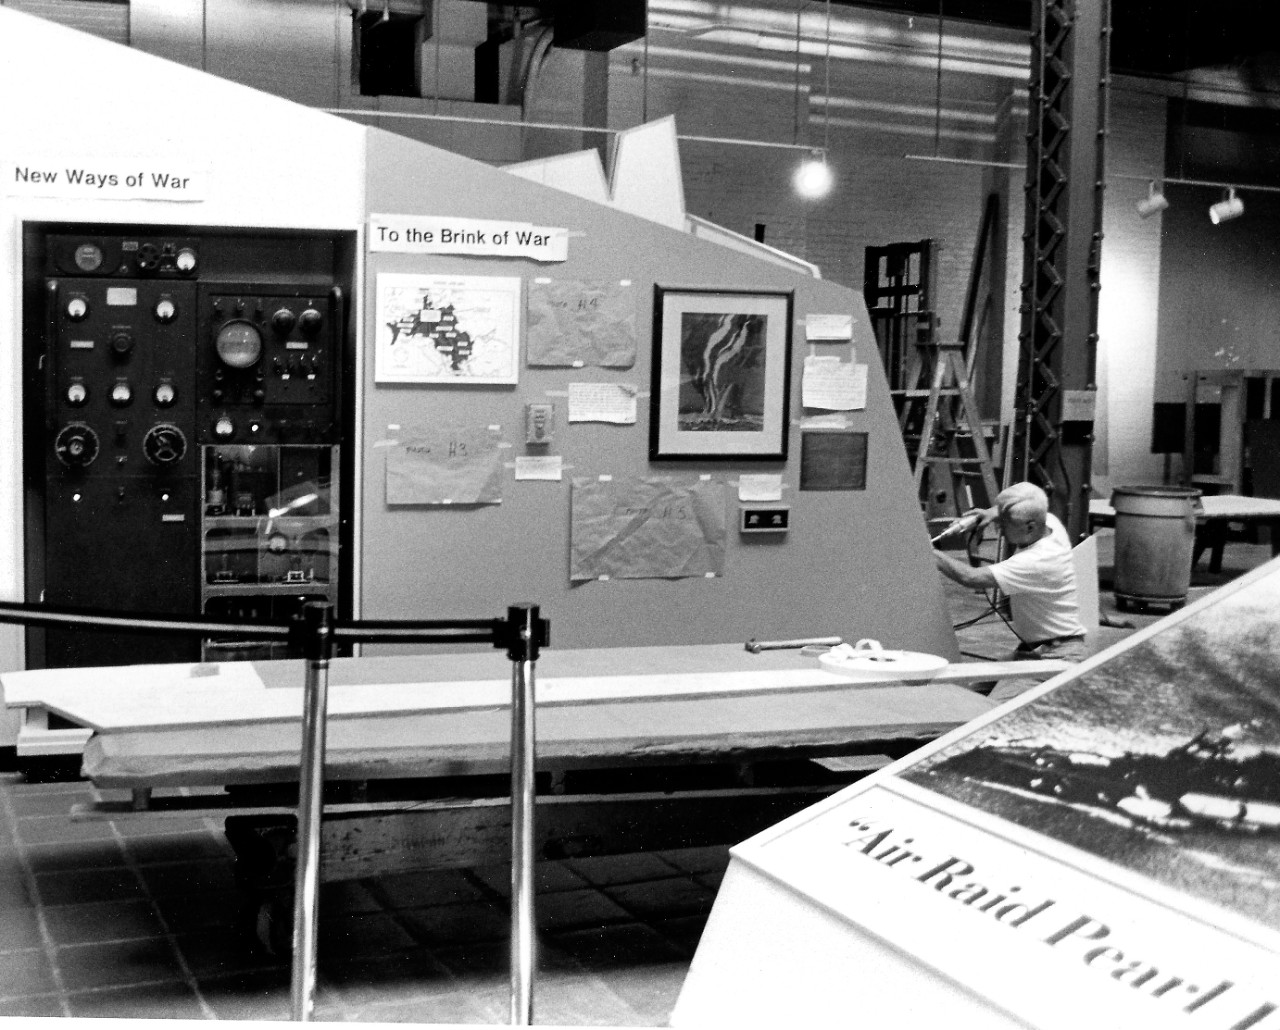 NMUSN-161:  In Harm’s Way:  Atlantic, late 1980s.   National Museum of the U.S. Navy, Bldg. 76.  Exhibit Specialist Mr. Kim builds “To the Brink of War” part of the exhibit.    Note the XAF radar to the far left under the banner of “New Ways of War”.    National Museum of the U.S. Navy Photograph Collection.  